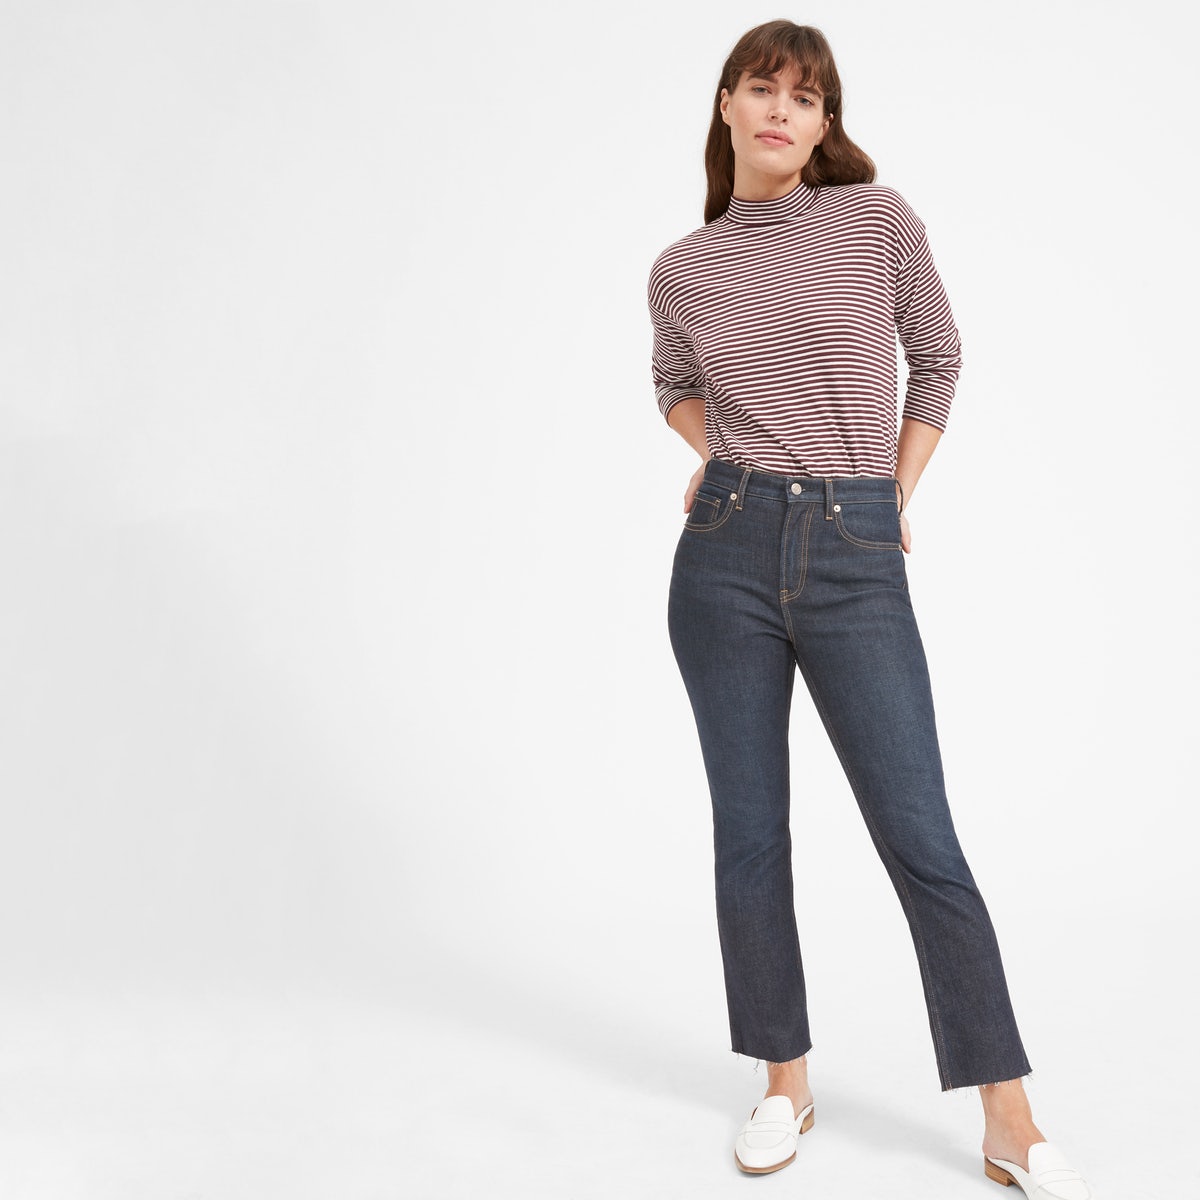 Four Spring Wardrobe Outfits Created Using Everlane Clothing